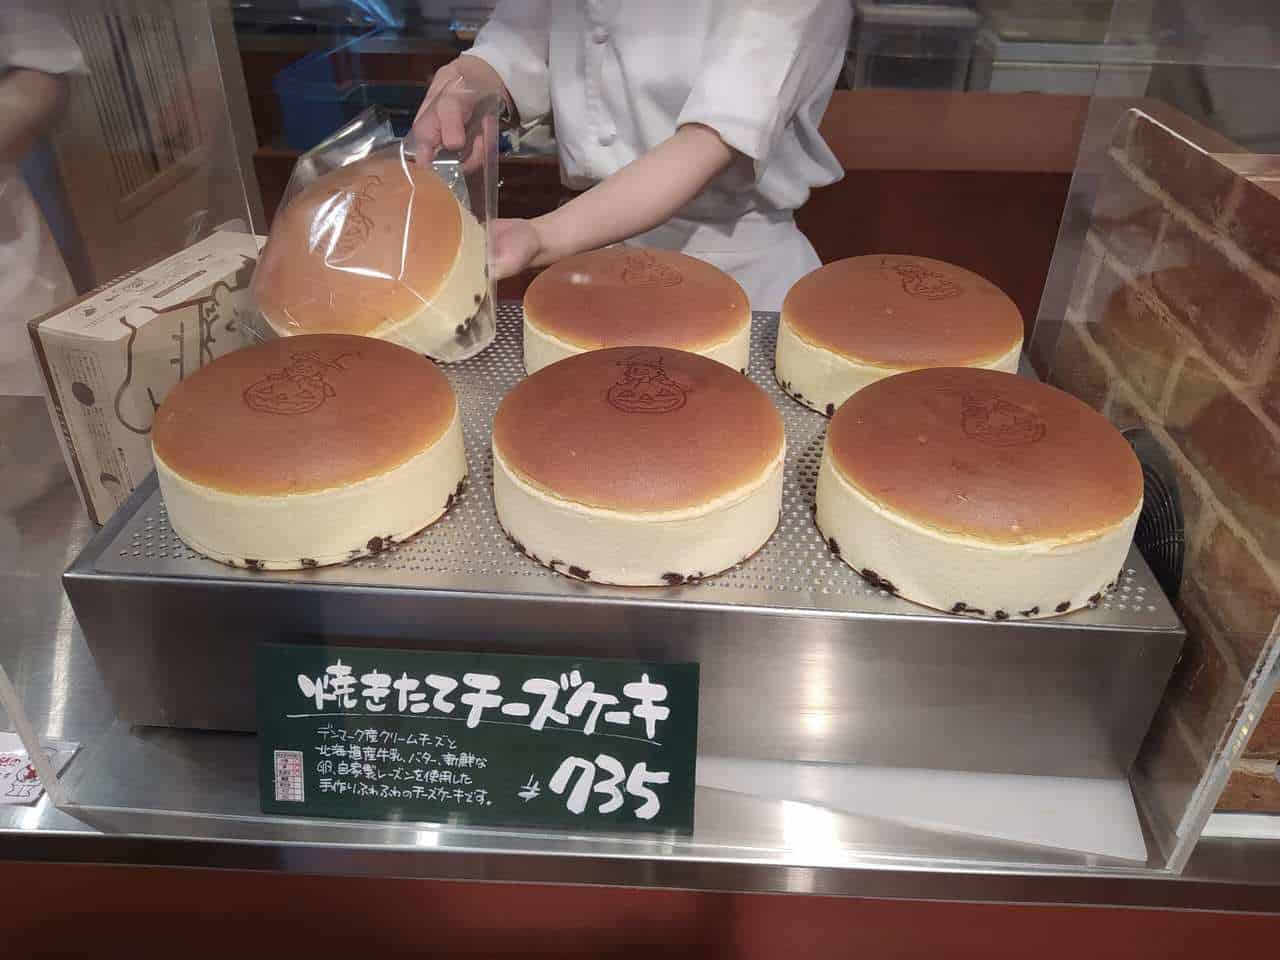 Cheesecake shops, one of the most famous japanese cakes in the world